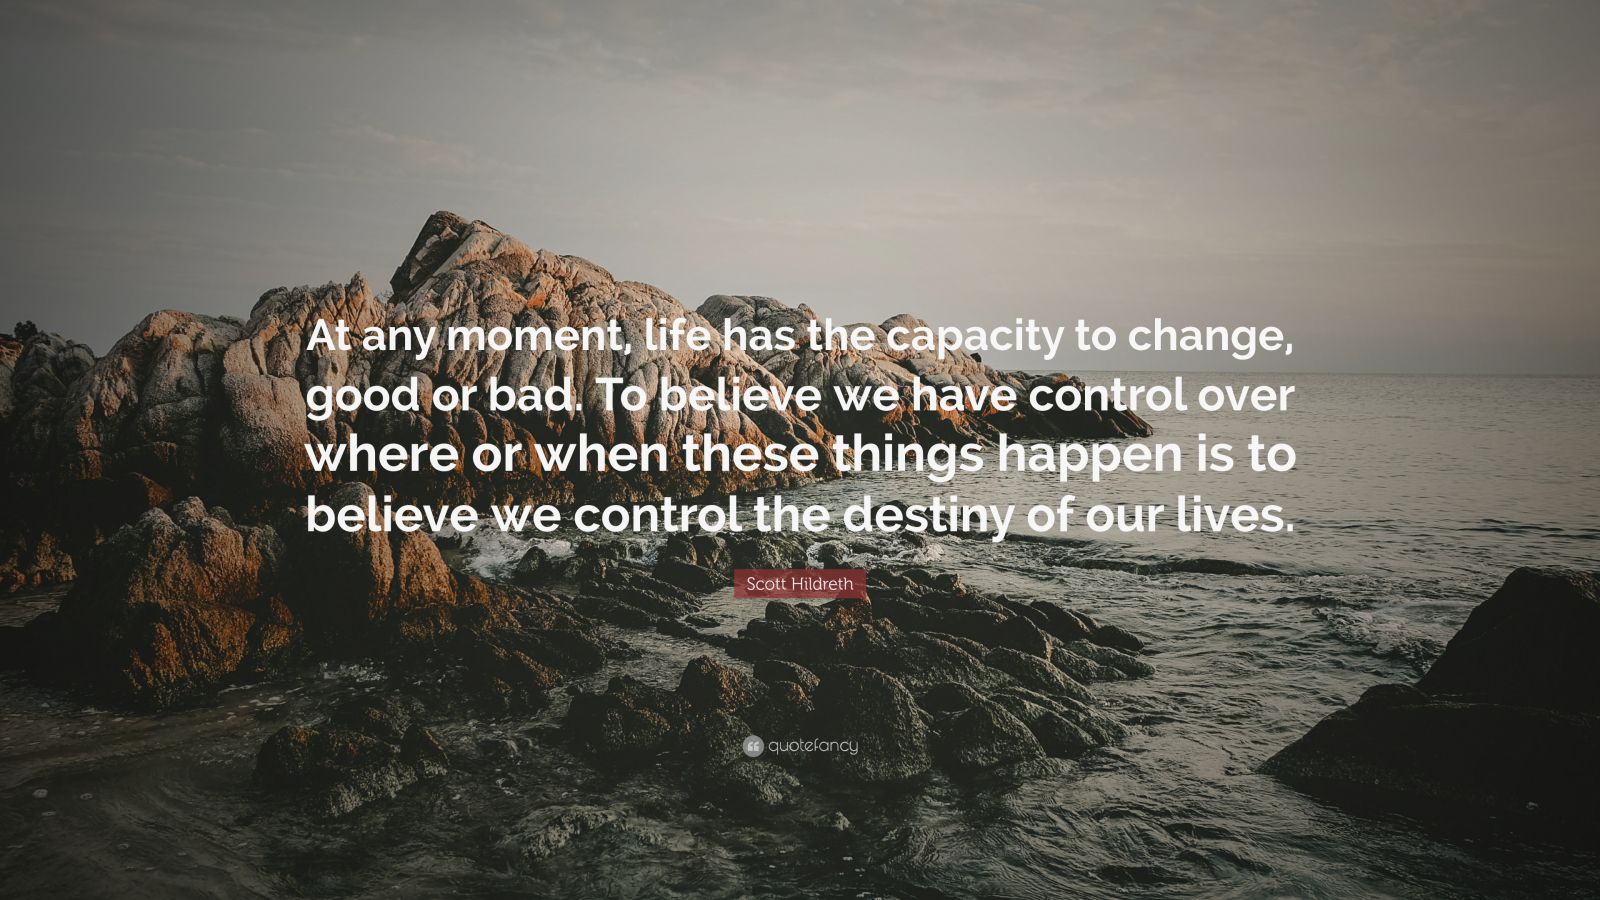 Living In The Moment -- Good Or Bad?